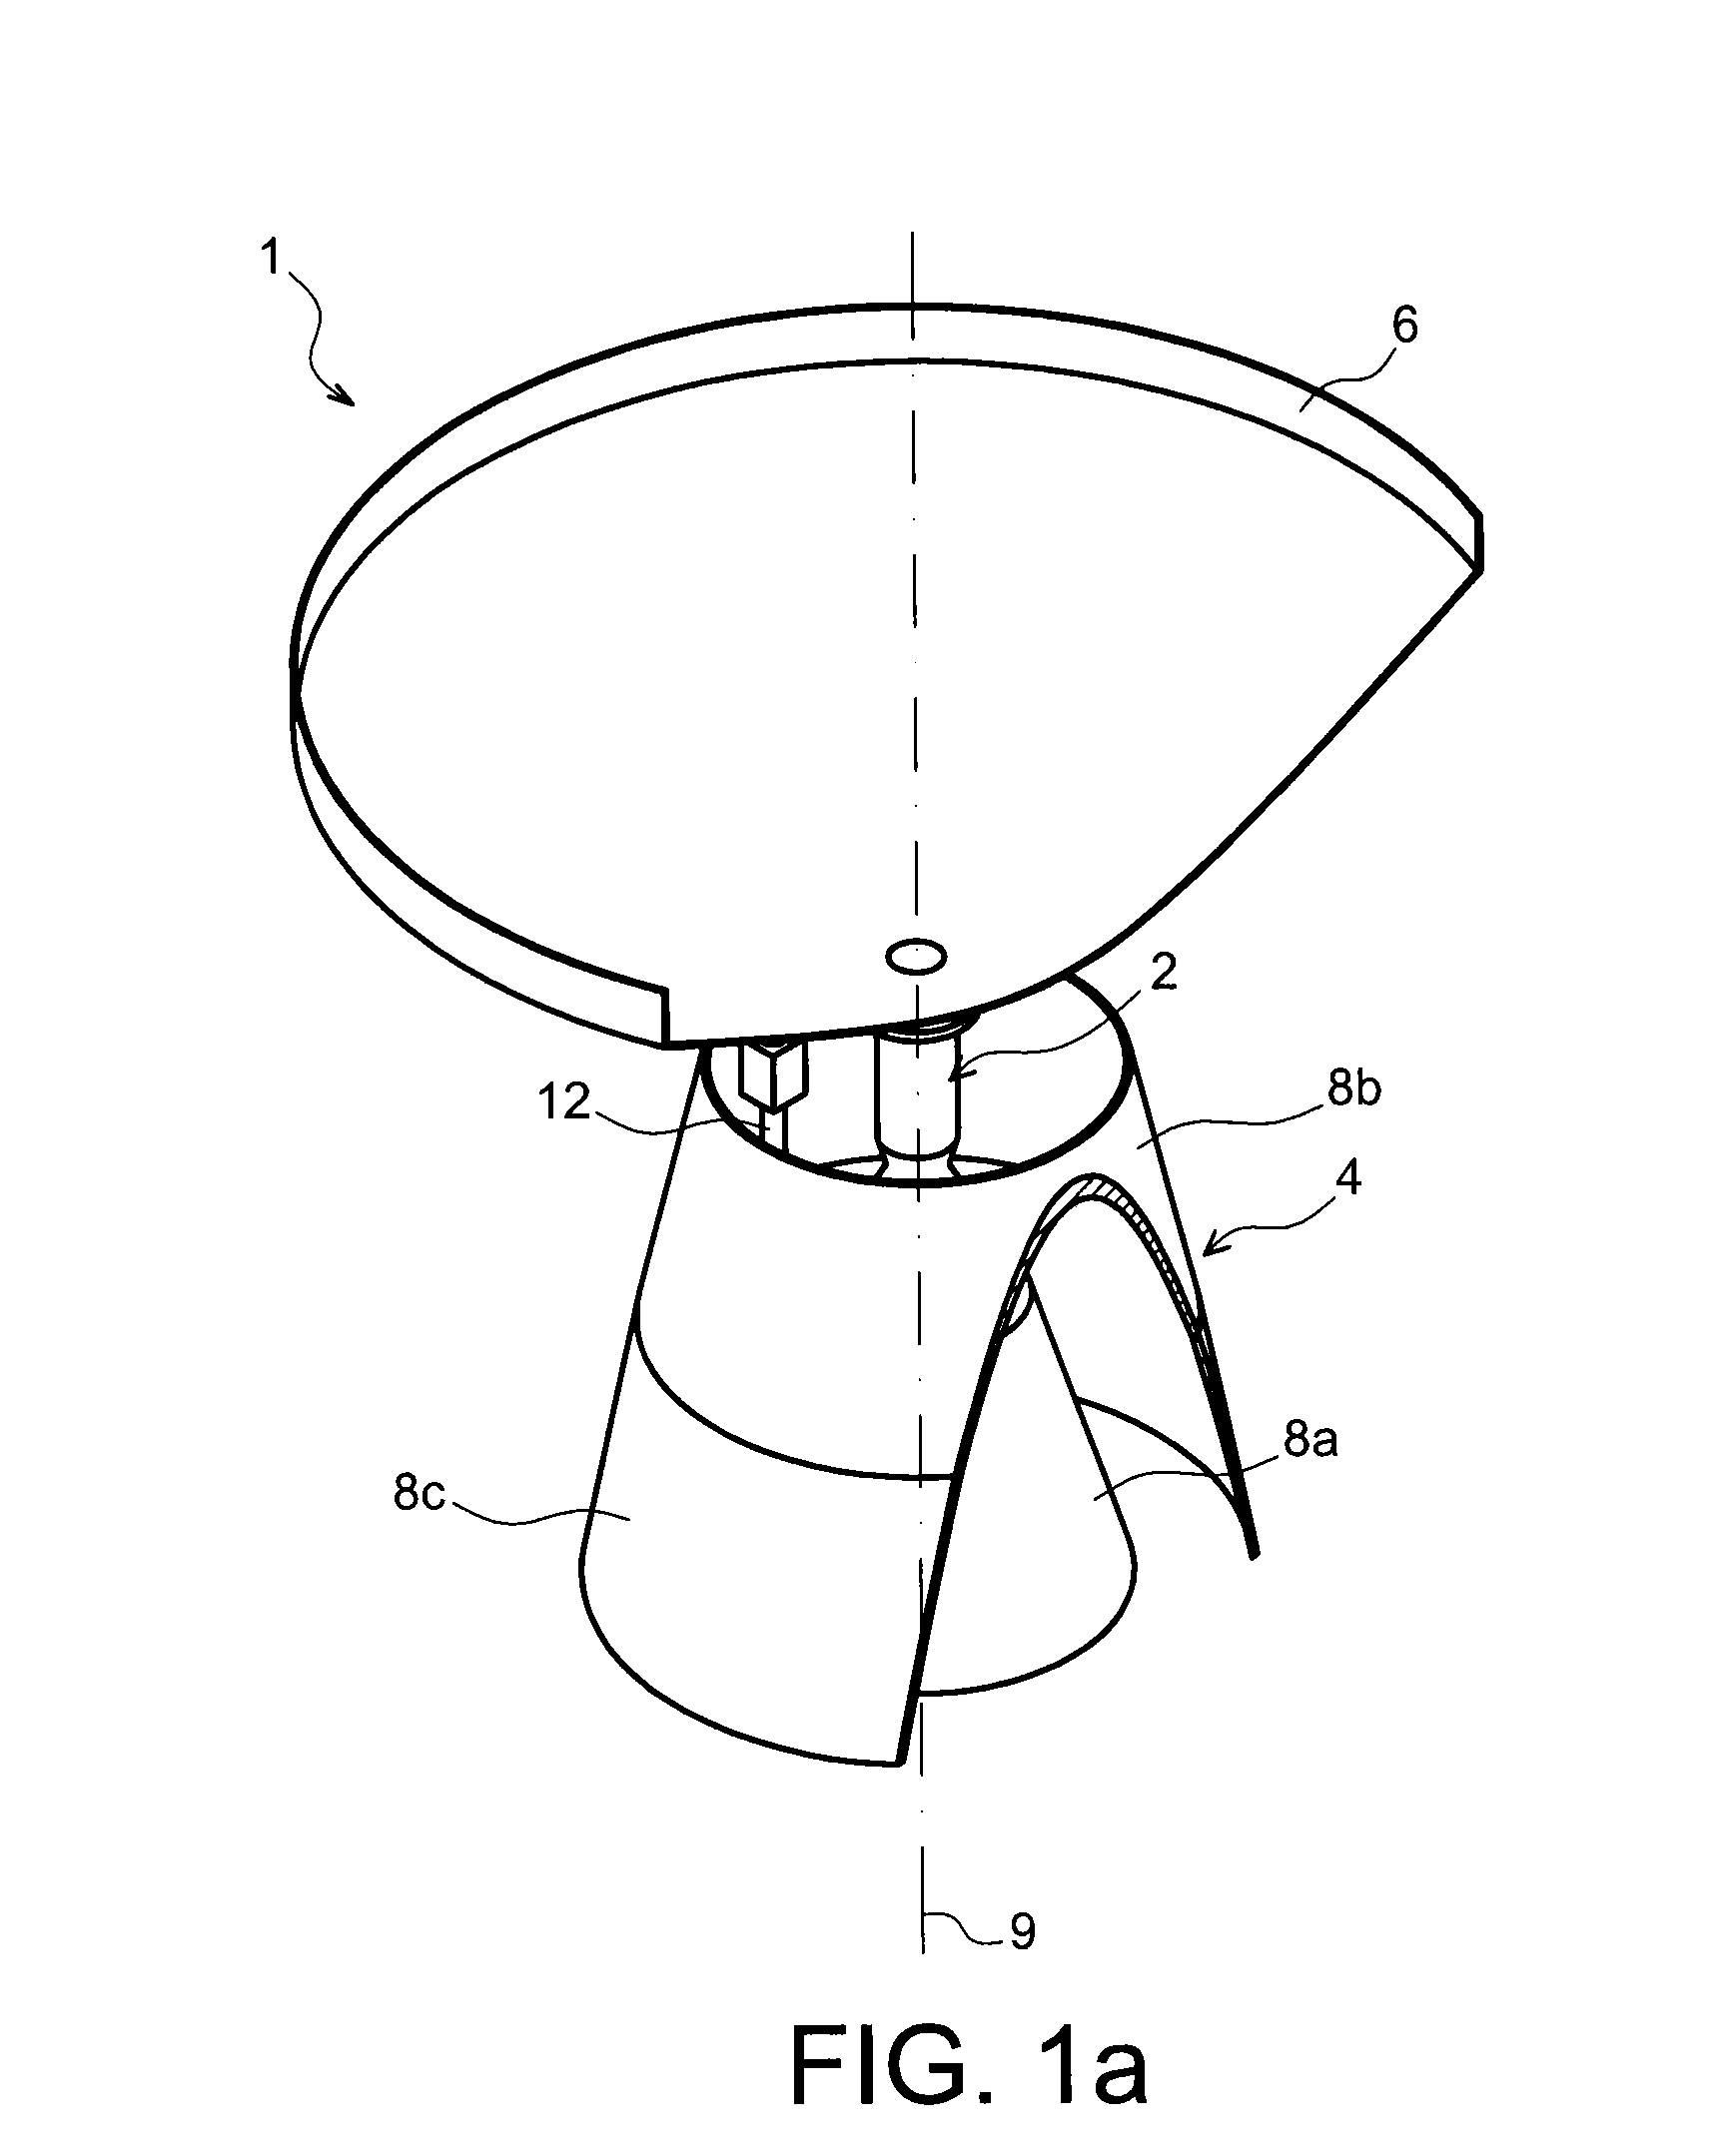 Launcher stage comprising a temporary support structure for temporarily supporting nozzle sections allowing access to the core of the engine